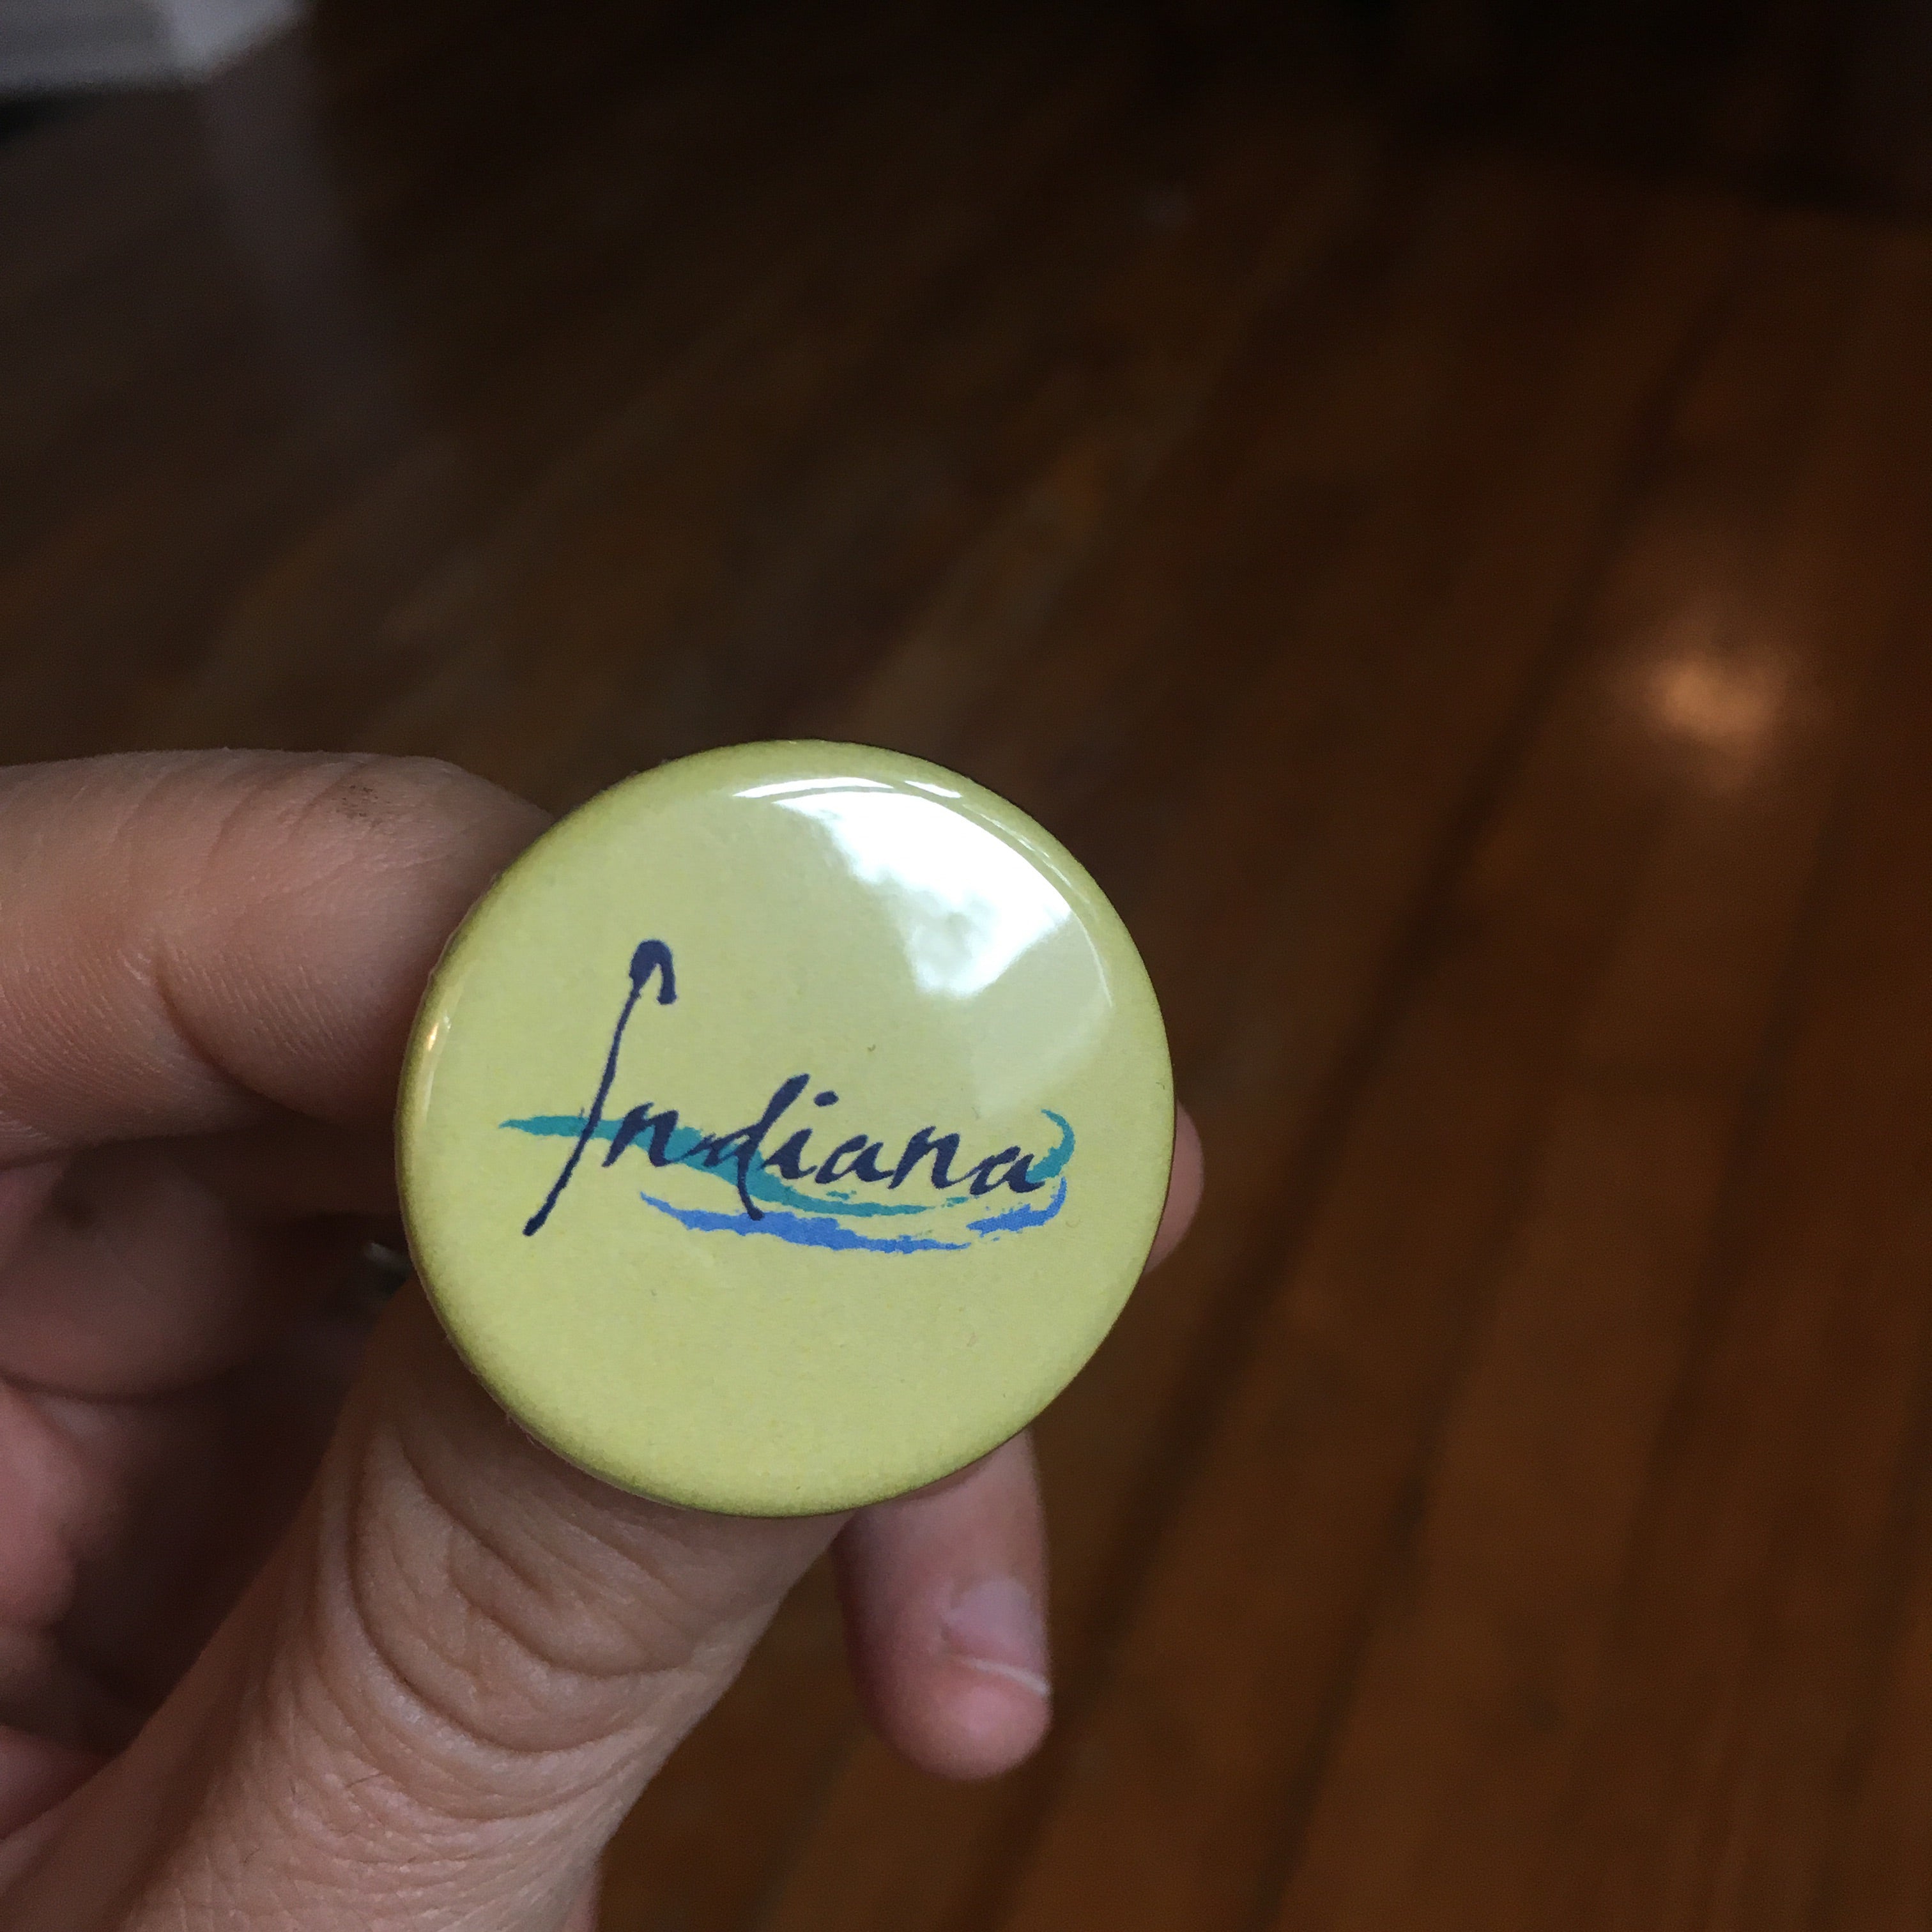 LaCroix Indiana button + magnet | badkneesTs